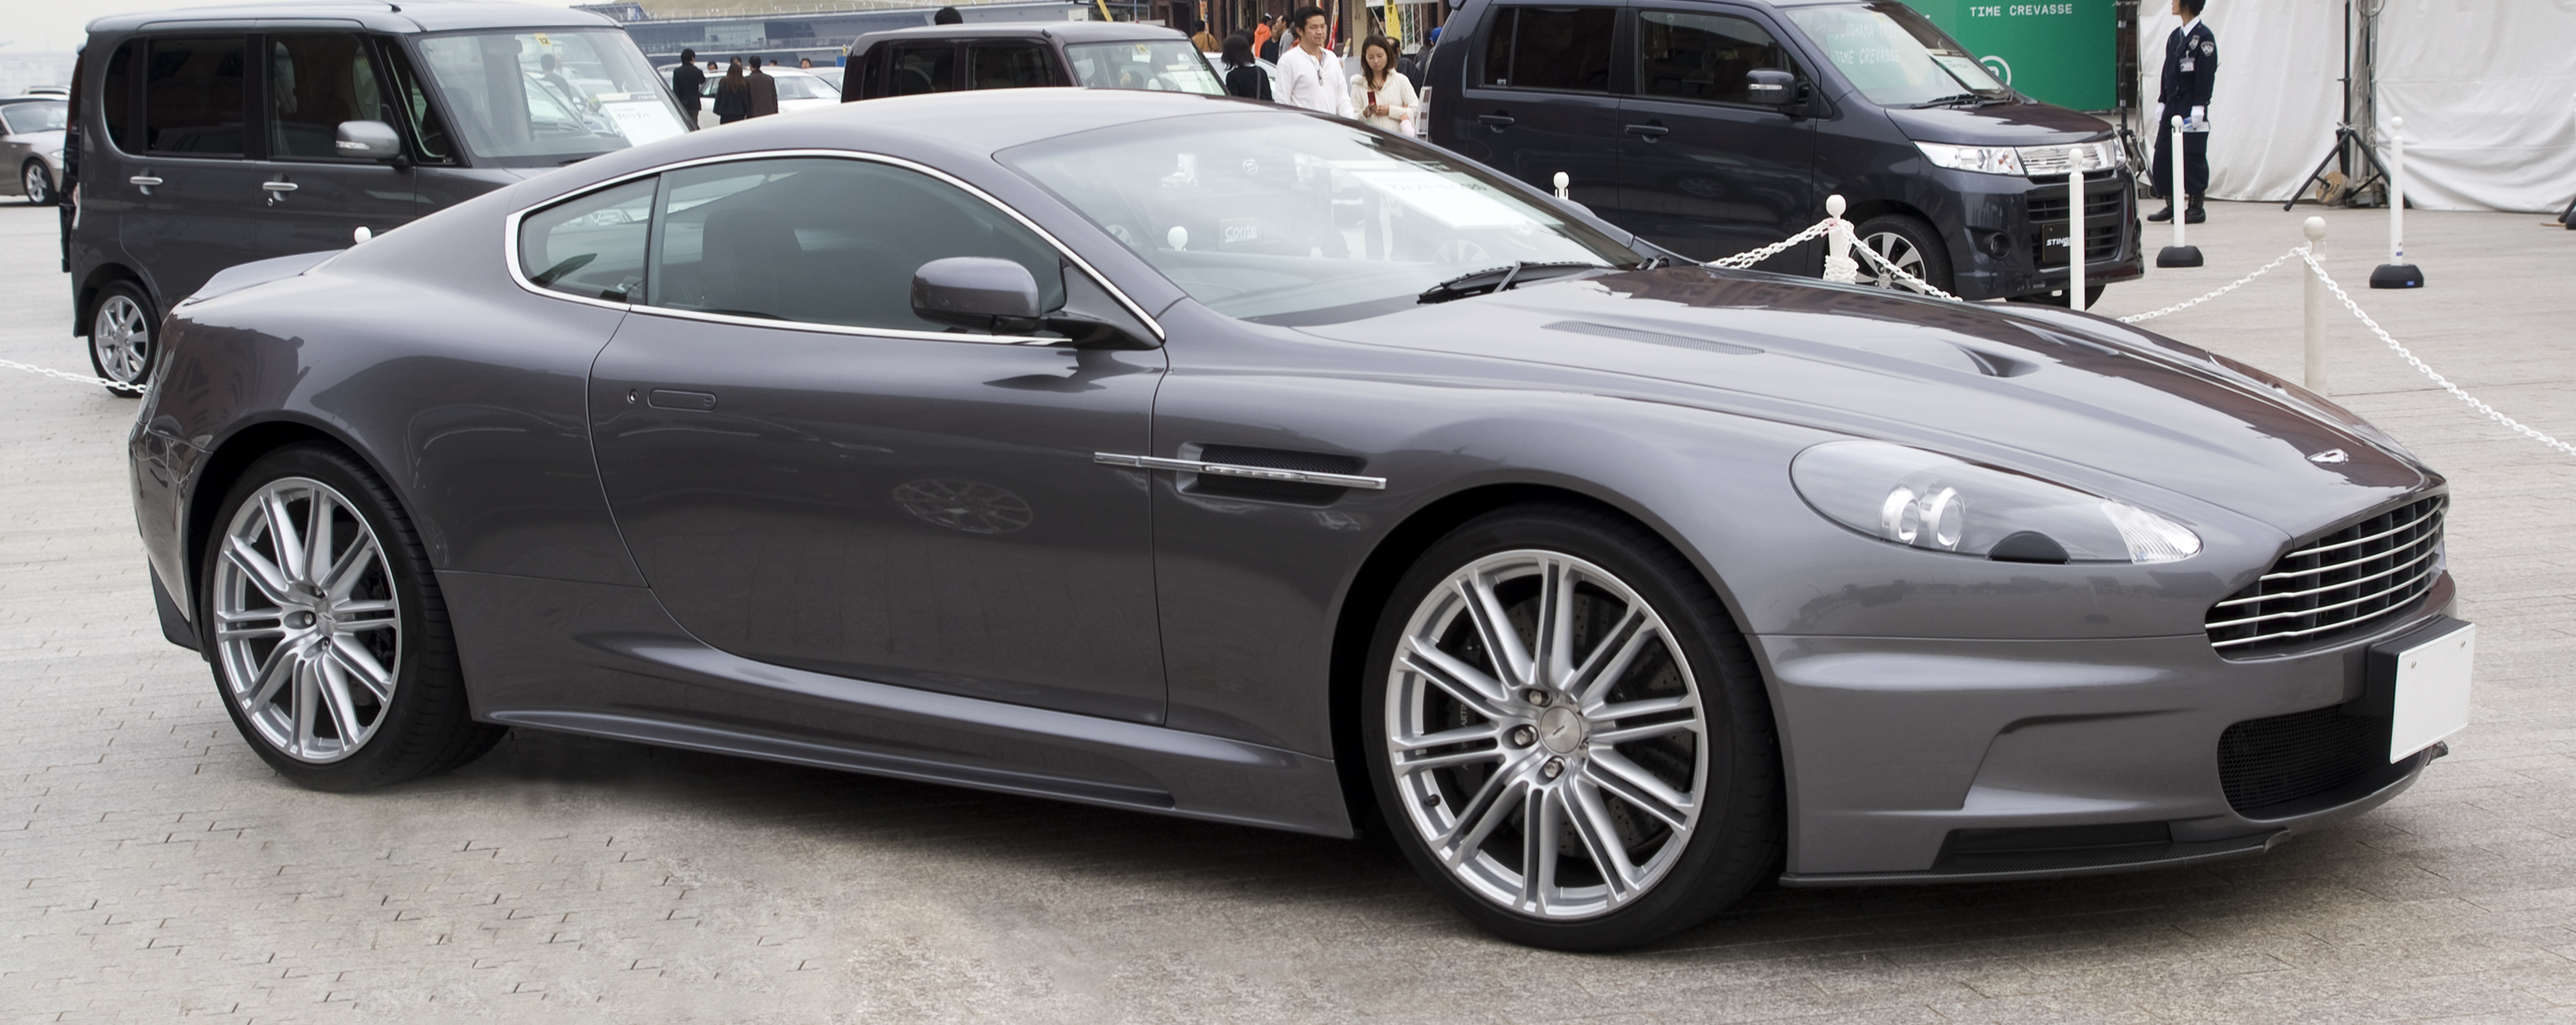 Images of Aston Martin DBS | 3708x1475